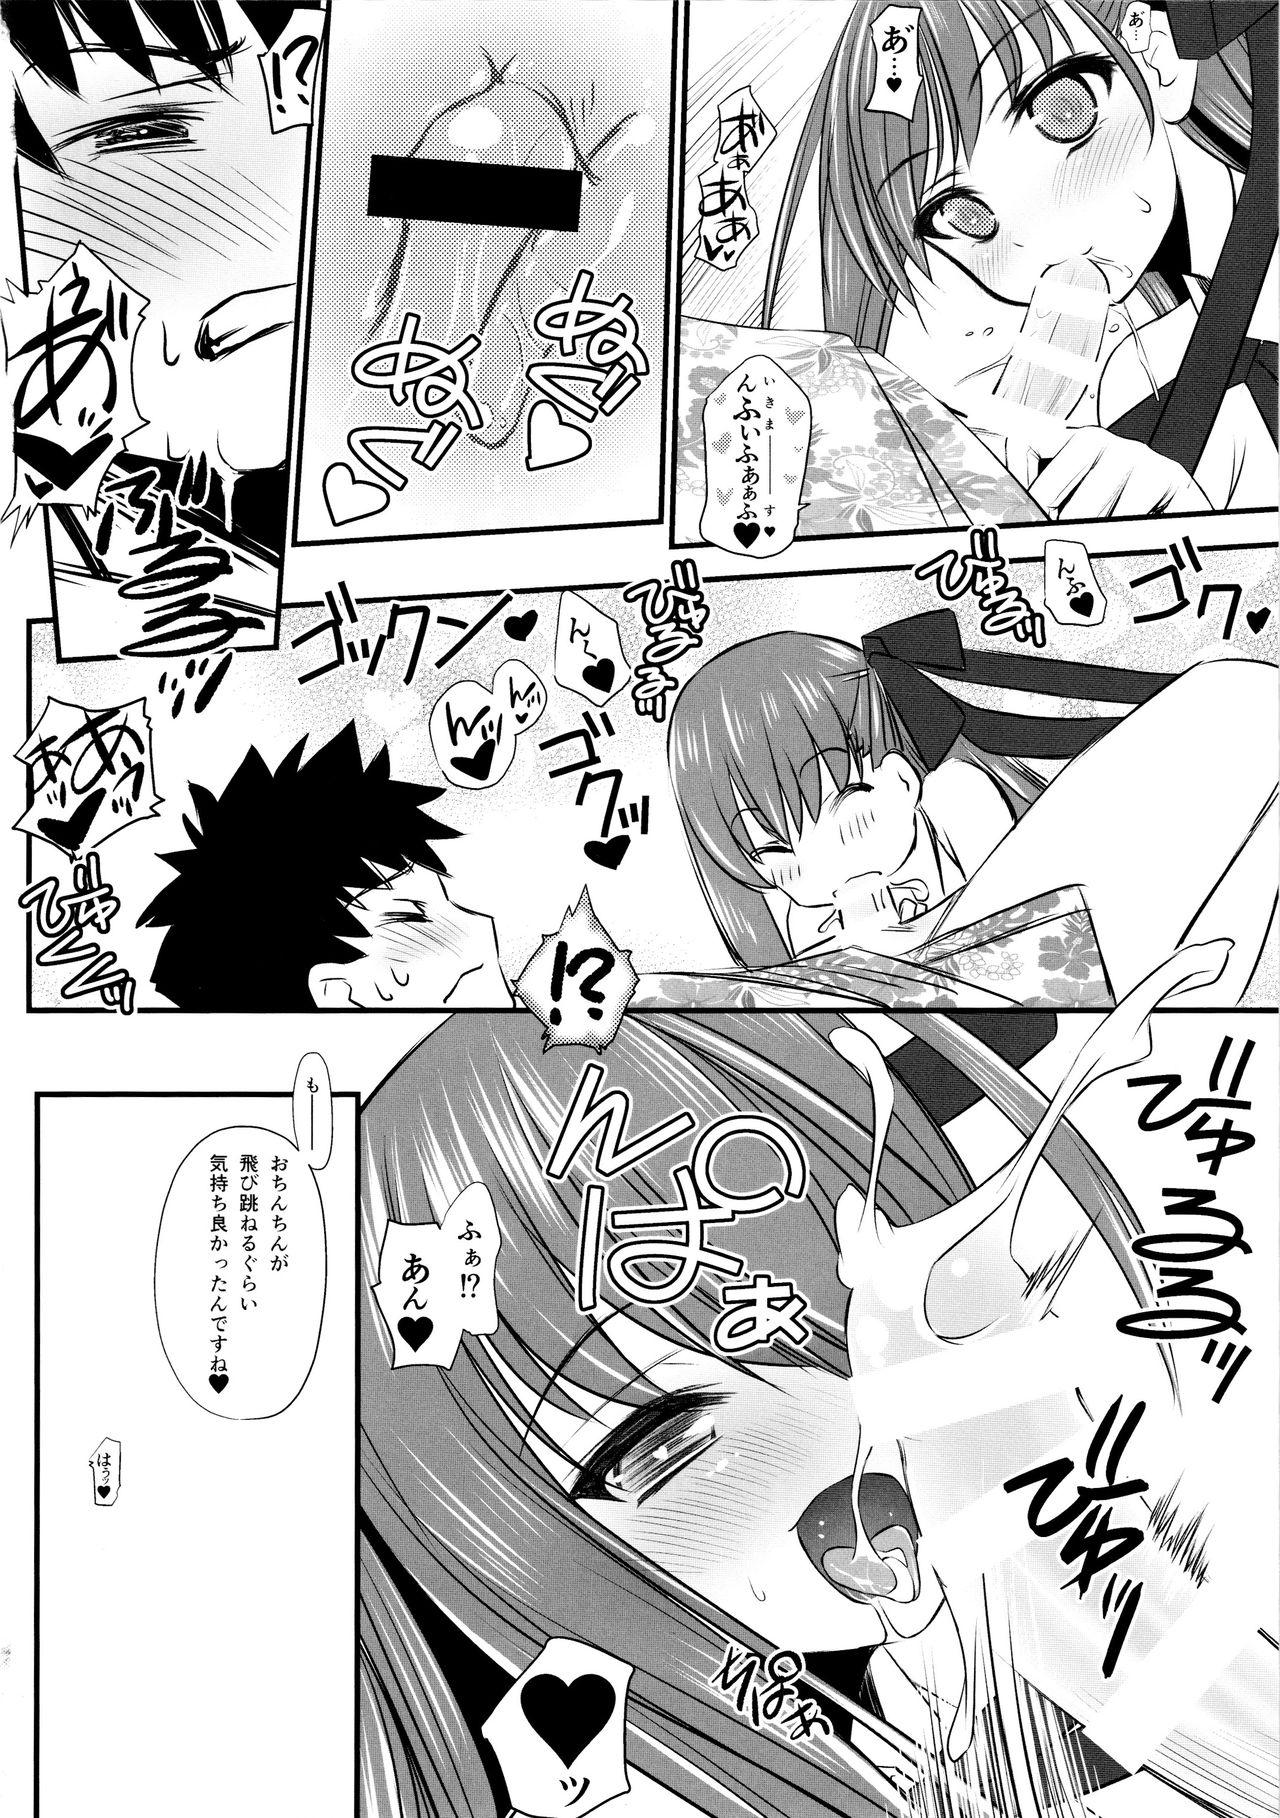 Fingering (C96) [Yakan Honpo (Inoue Tommy)] Queen [Kyuuin] BB-chan (Fate/Grand Order) - Fate grand order Mofos - Page 6